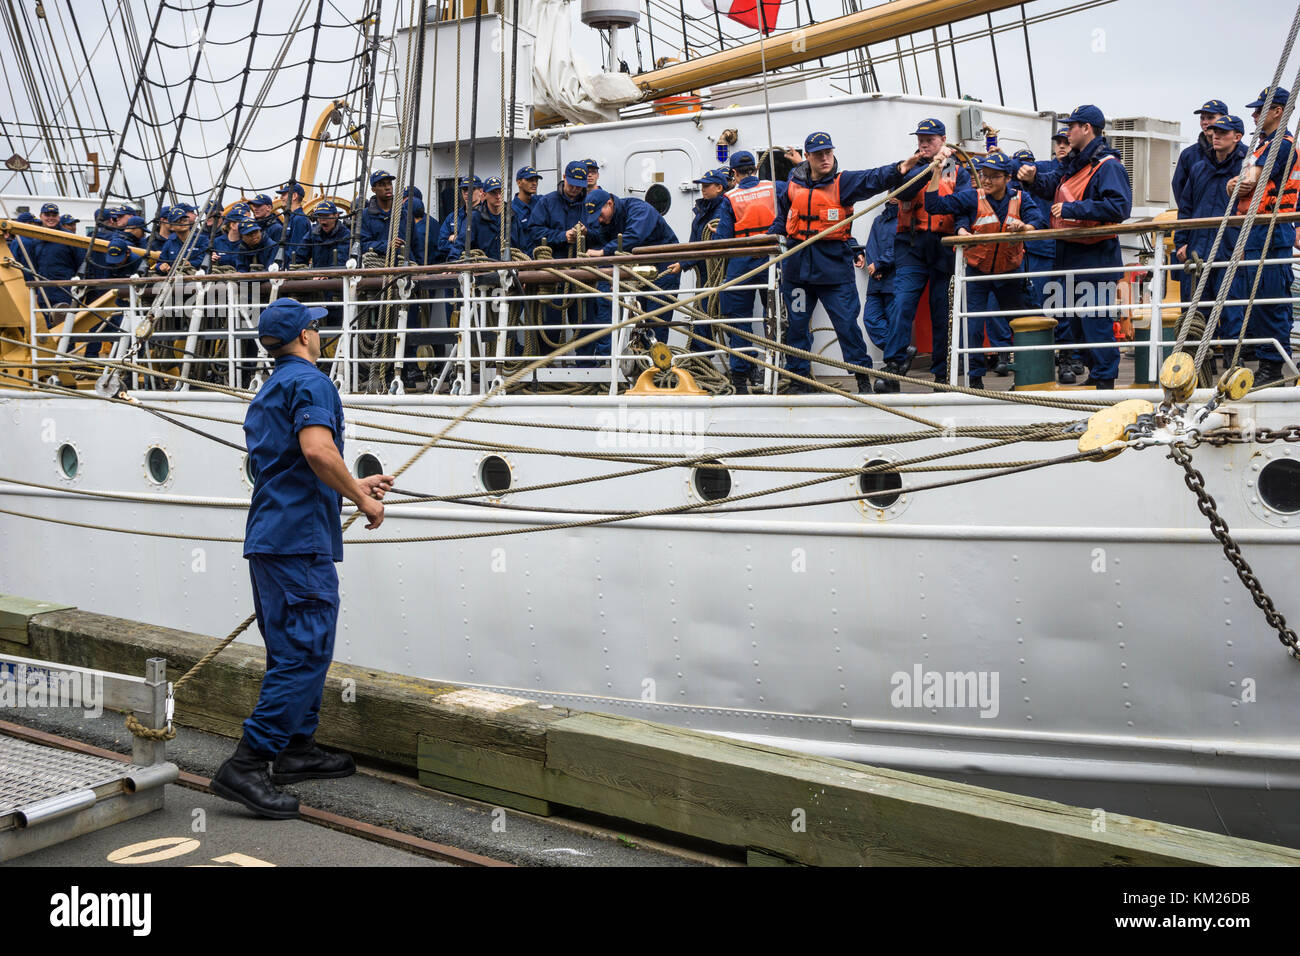 Crew of United States Coast Guard Barque 'Eagle' handling lines during arrival in Halifax, Nova Scotia, Canada for RDV 2017. Stock Photo